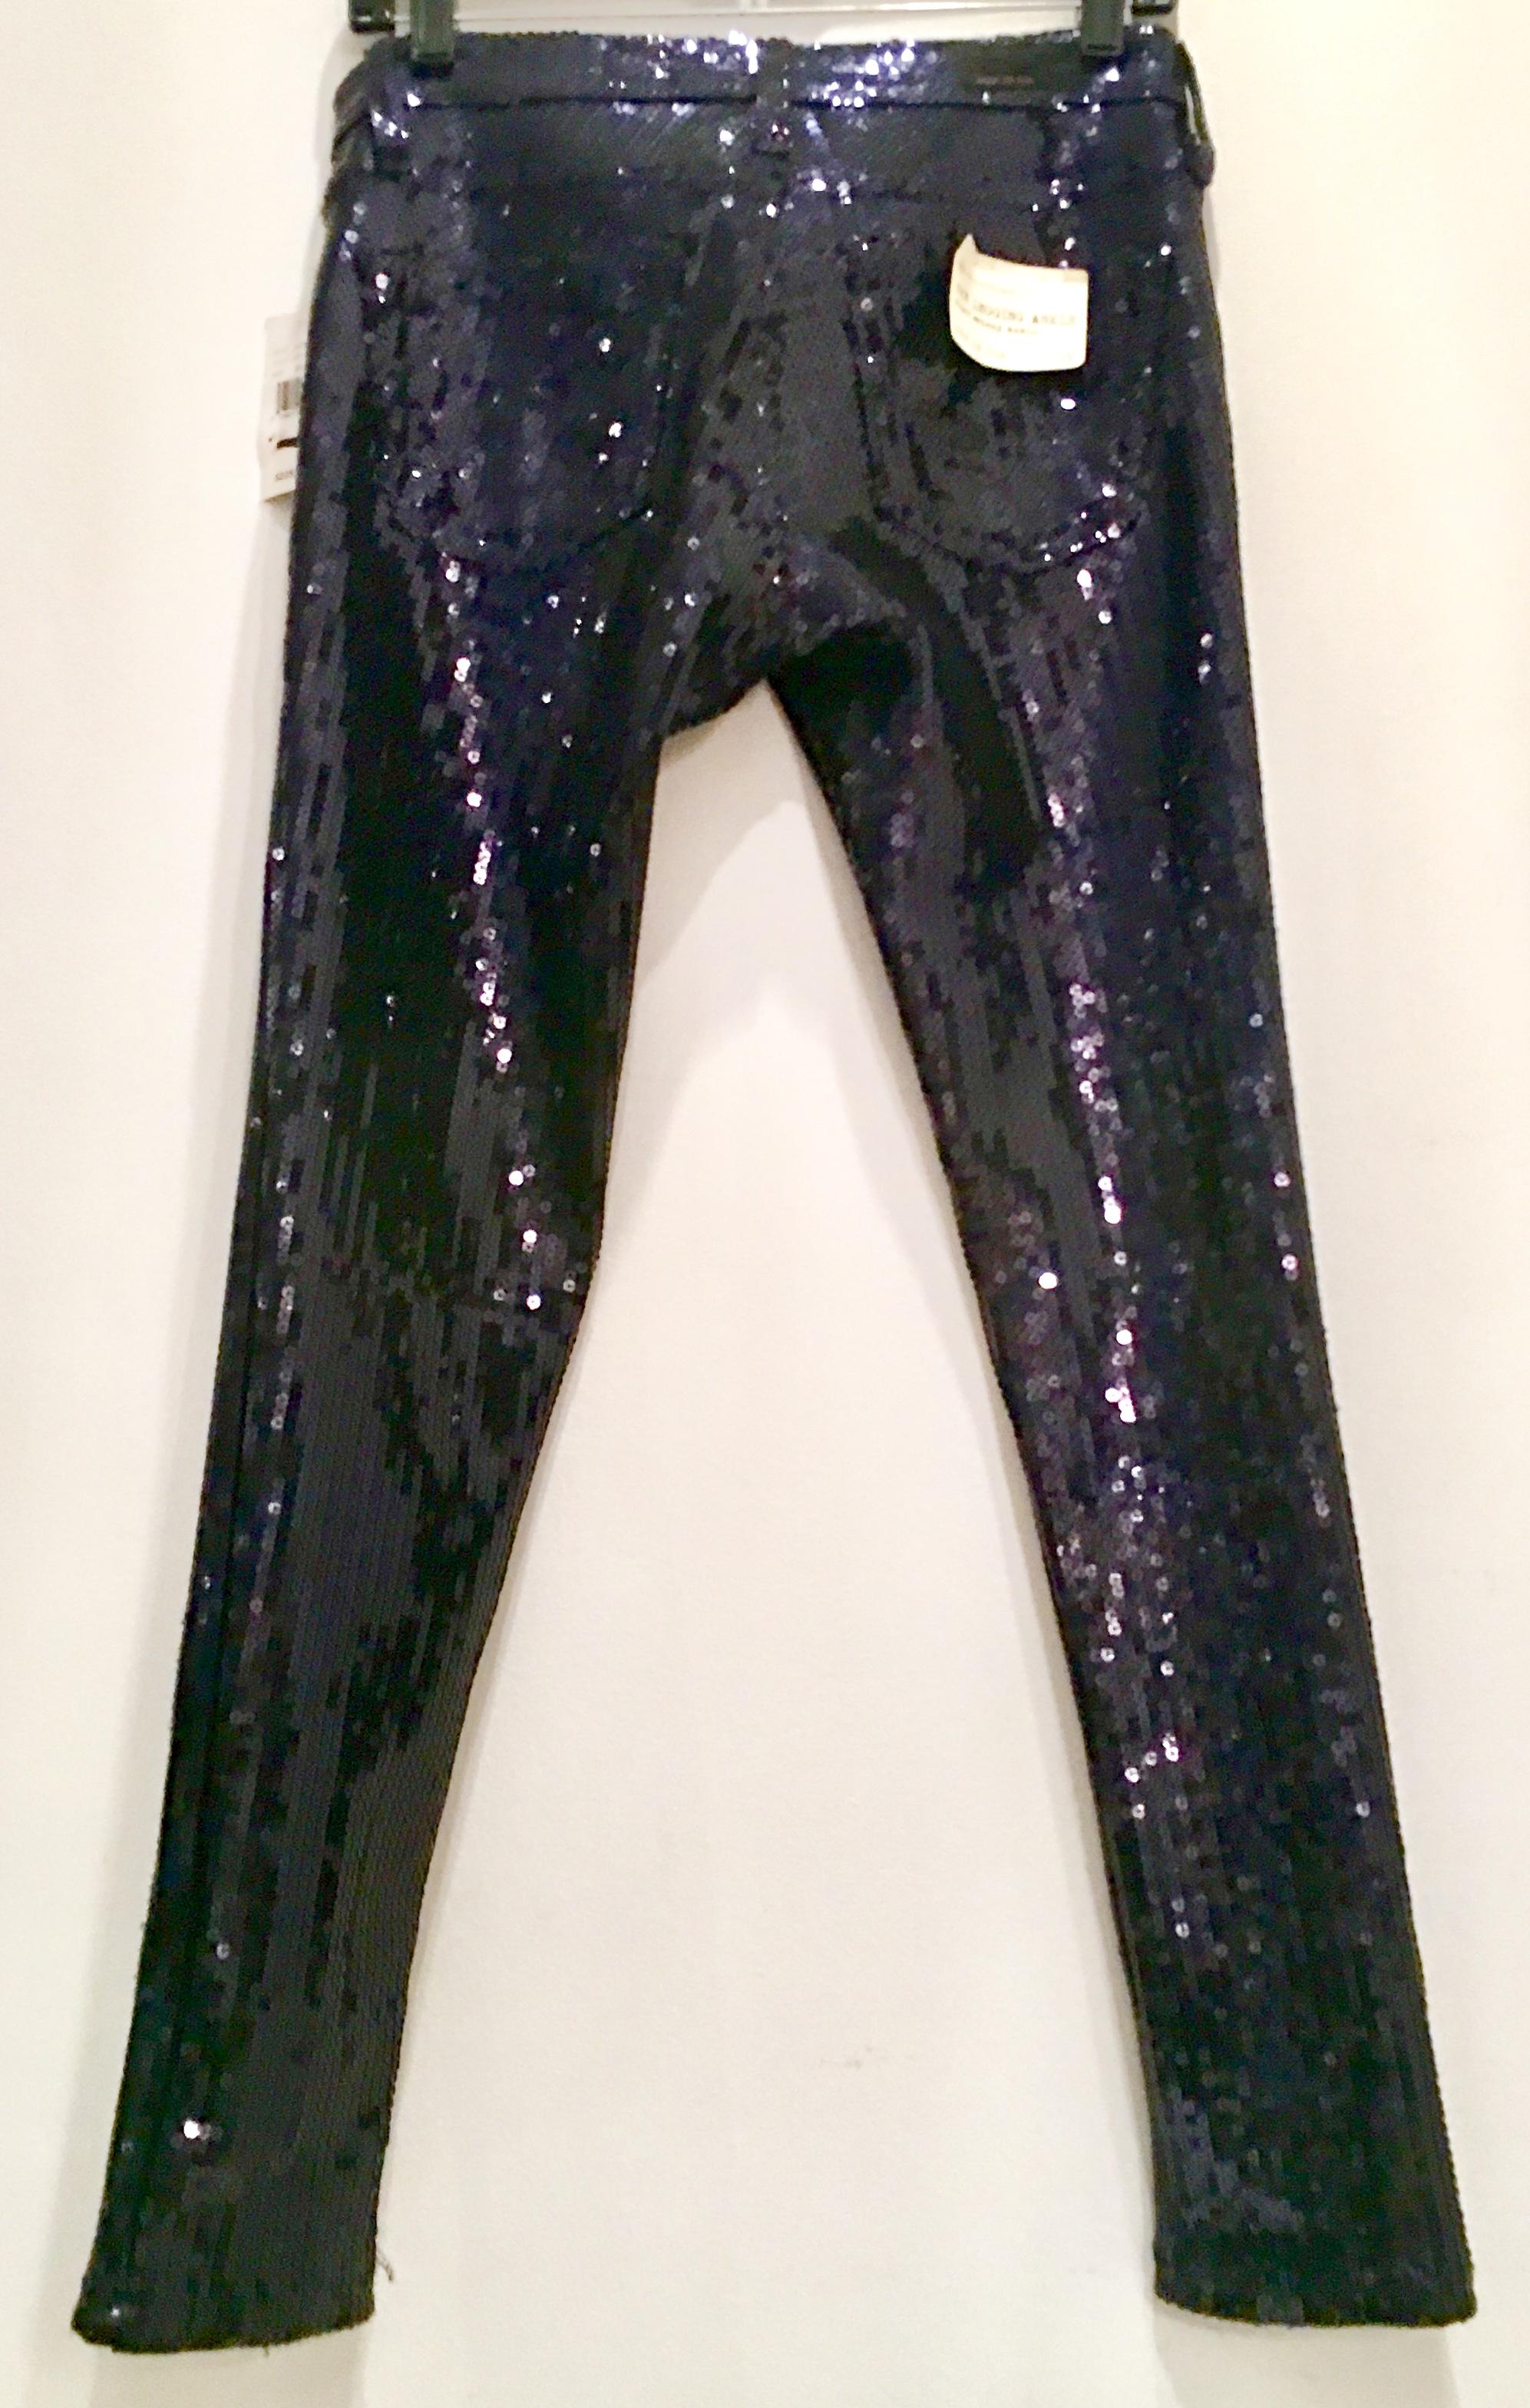 Contemporary & New, Navy Blue Sequin Jeans By Adriano Goldschmied., Size 28.  Super sleek and finely crafted these 